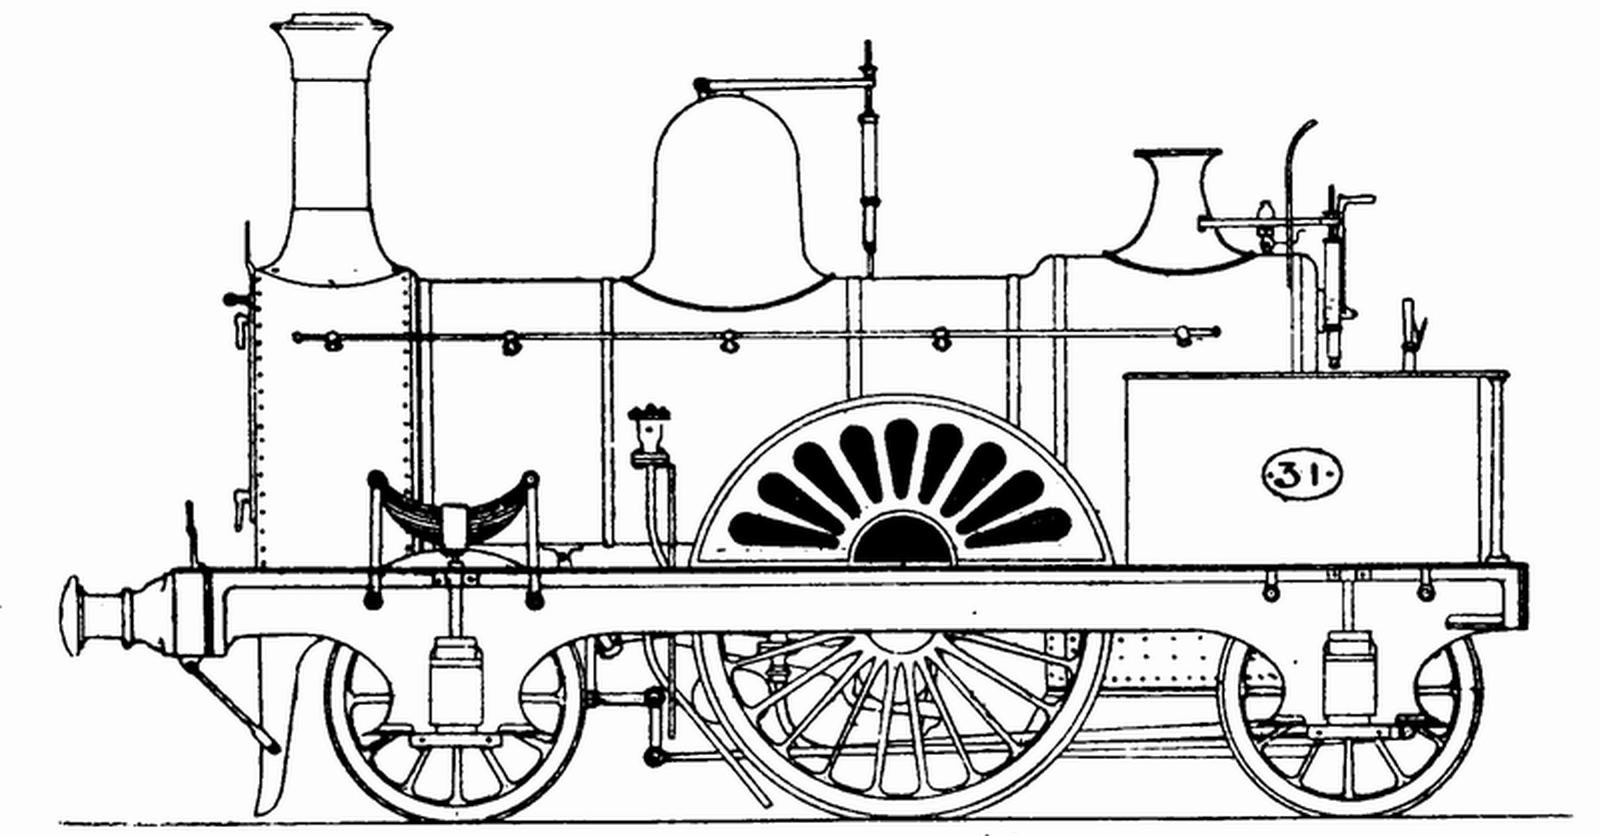 No. 31 with inside bearing of the driving axle